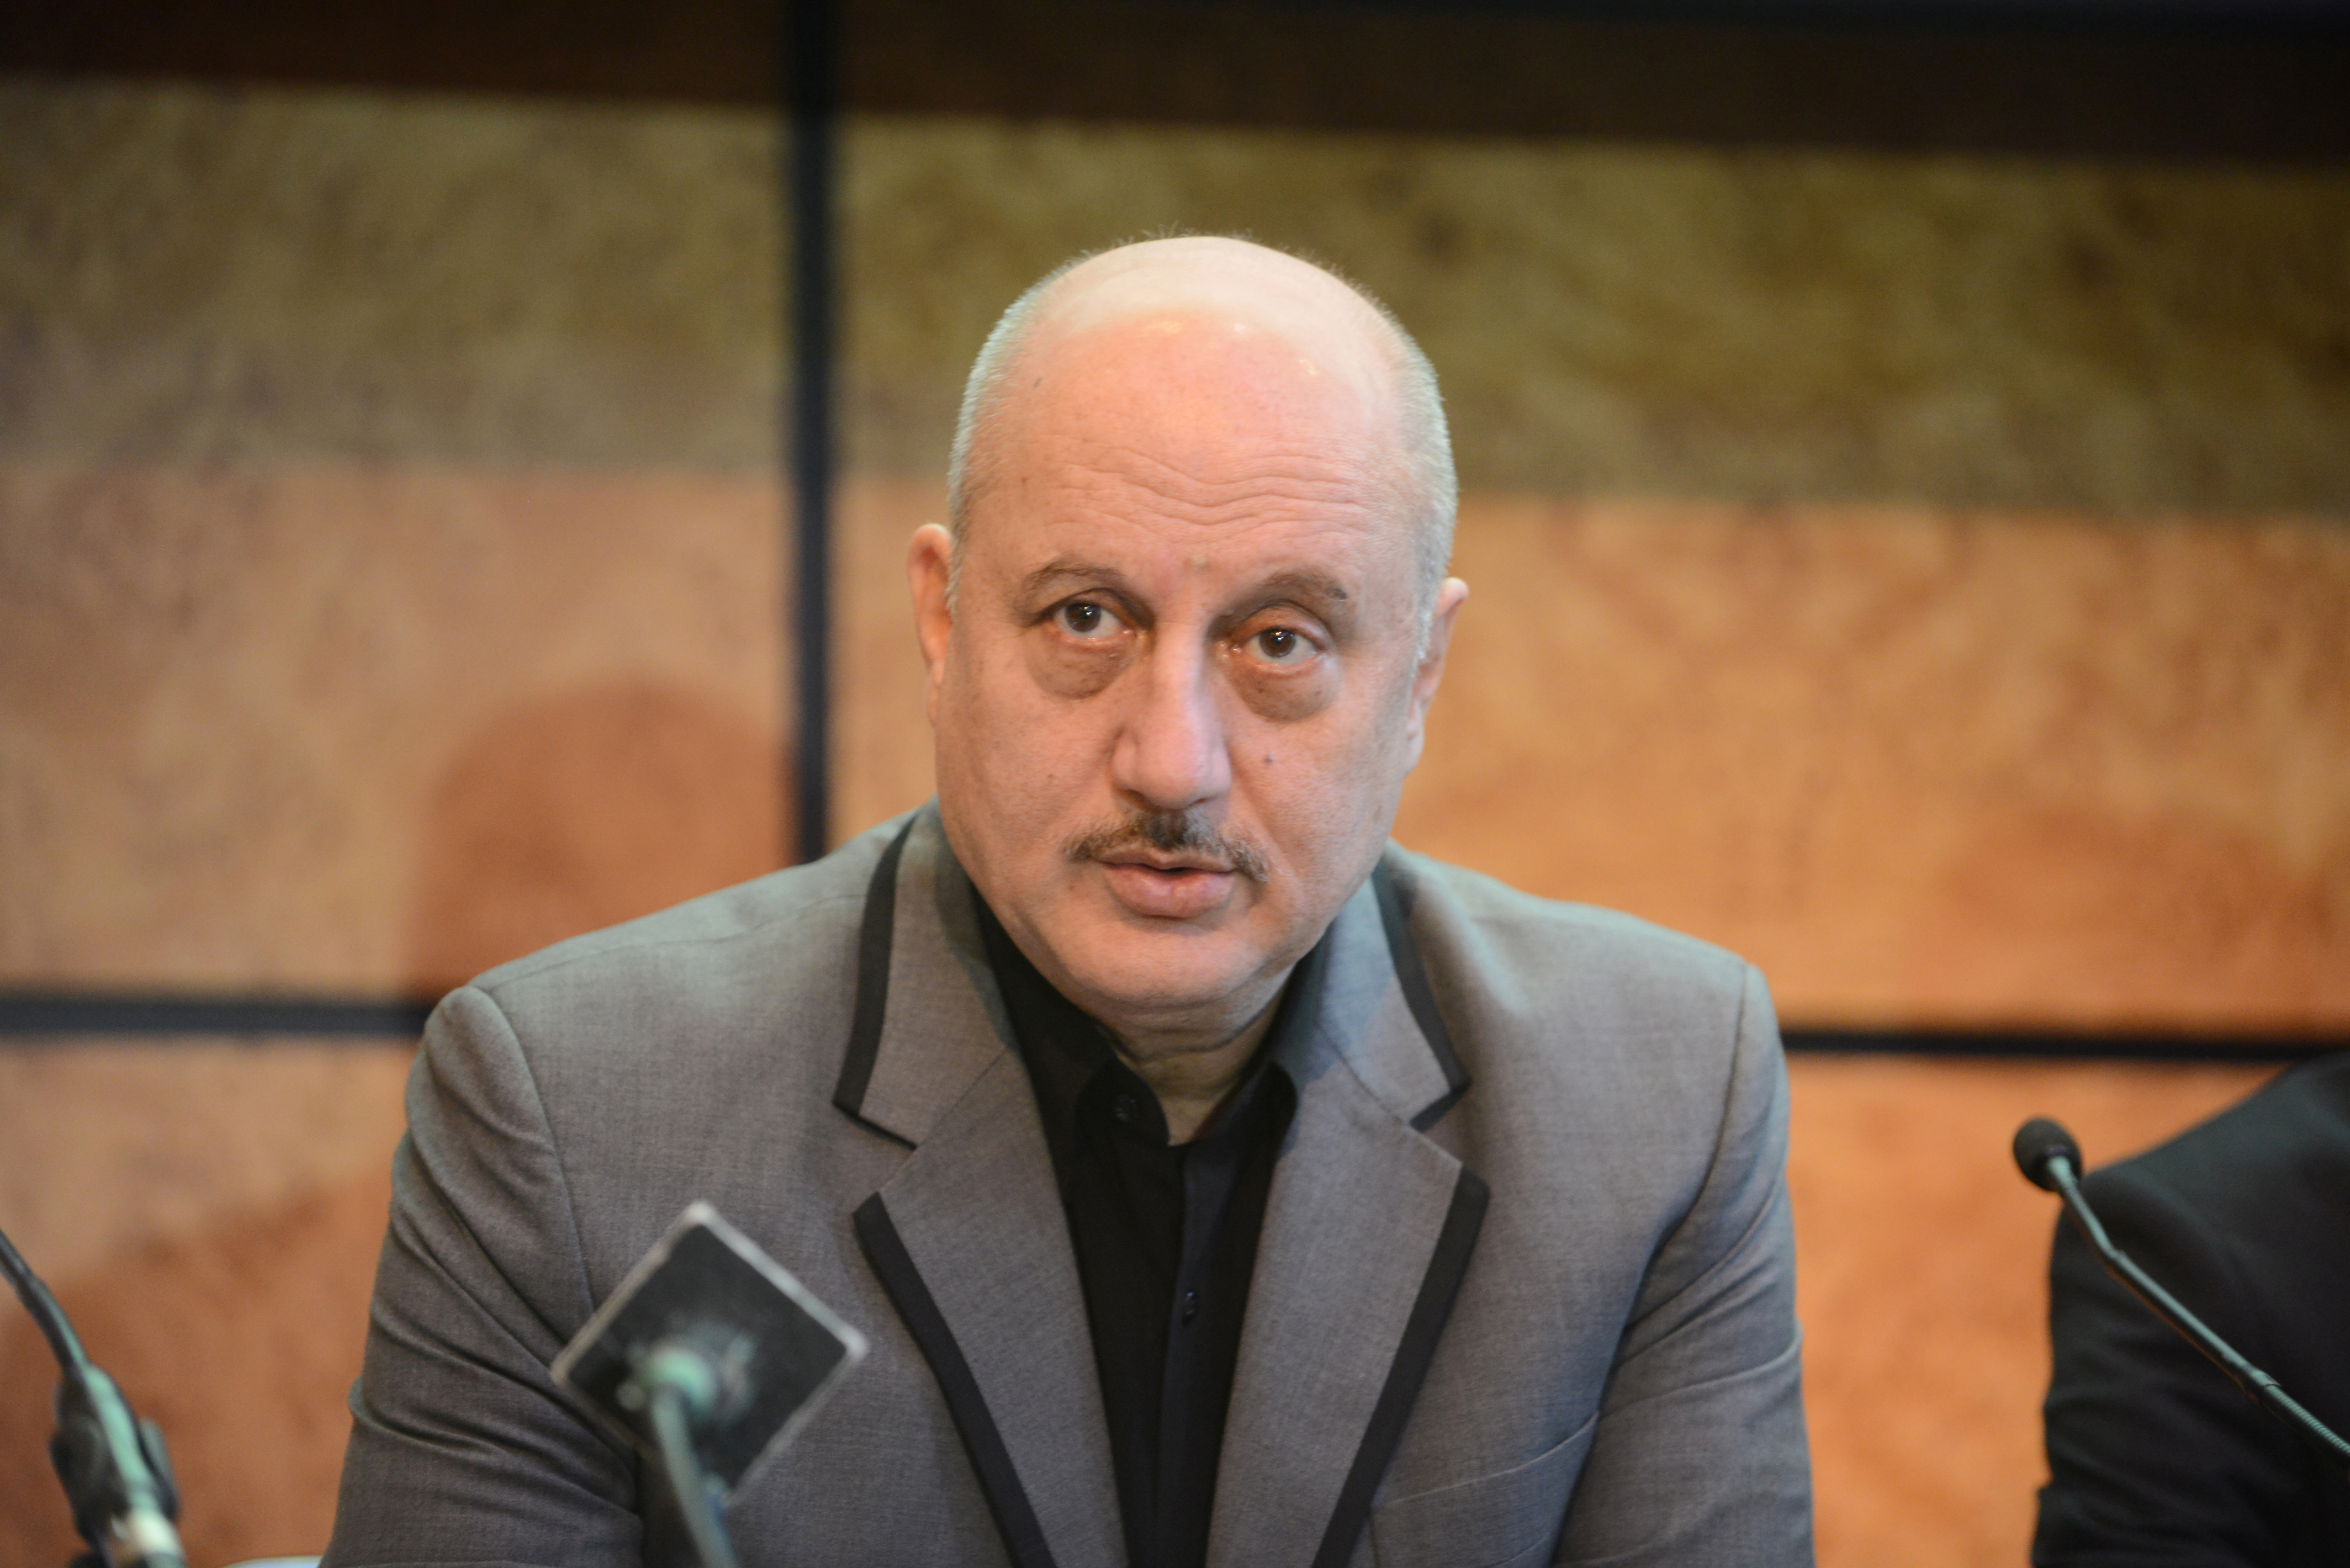 Social media abusers only want attention, says Anupam Kher